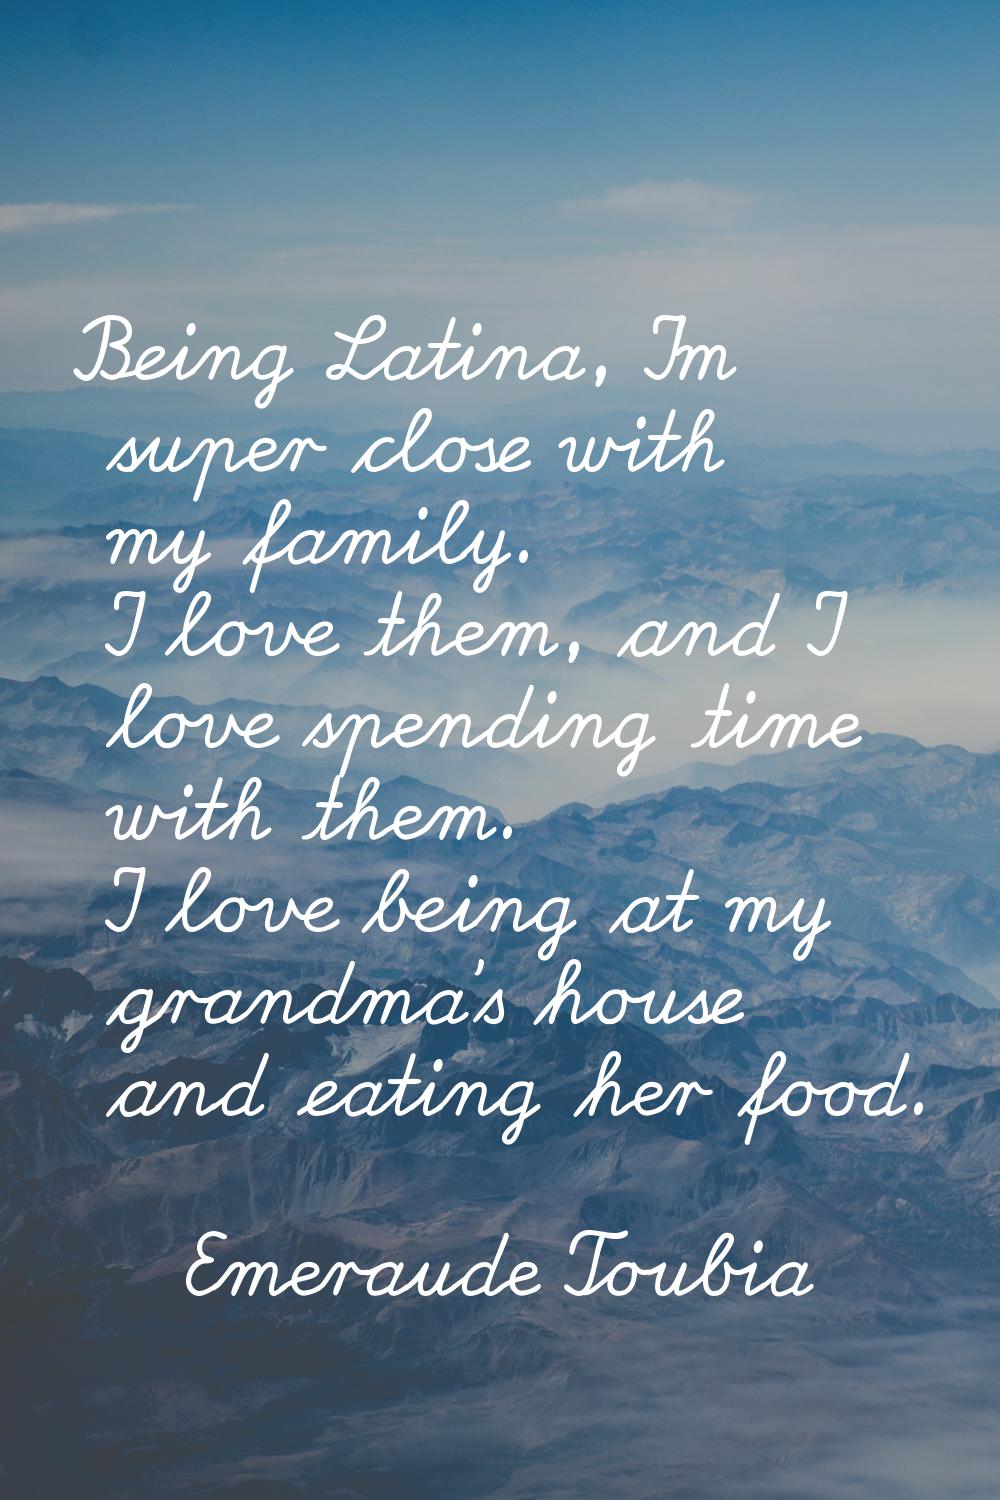 Being Latina, I'm super close with my family. I love them, and I love spending time with them. I lo